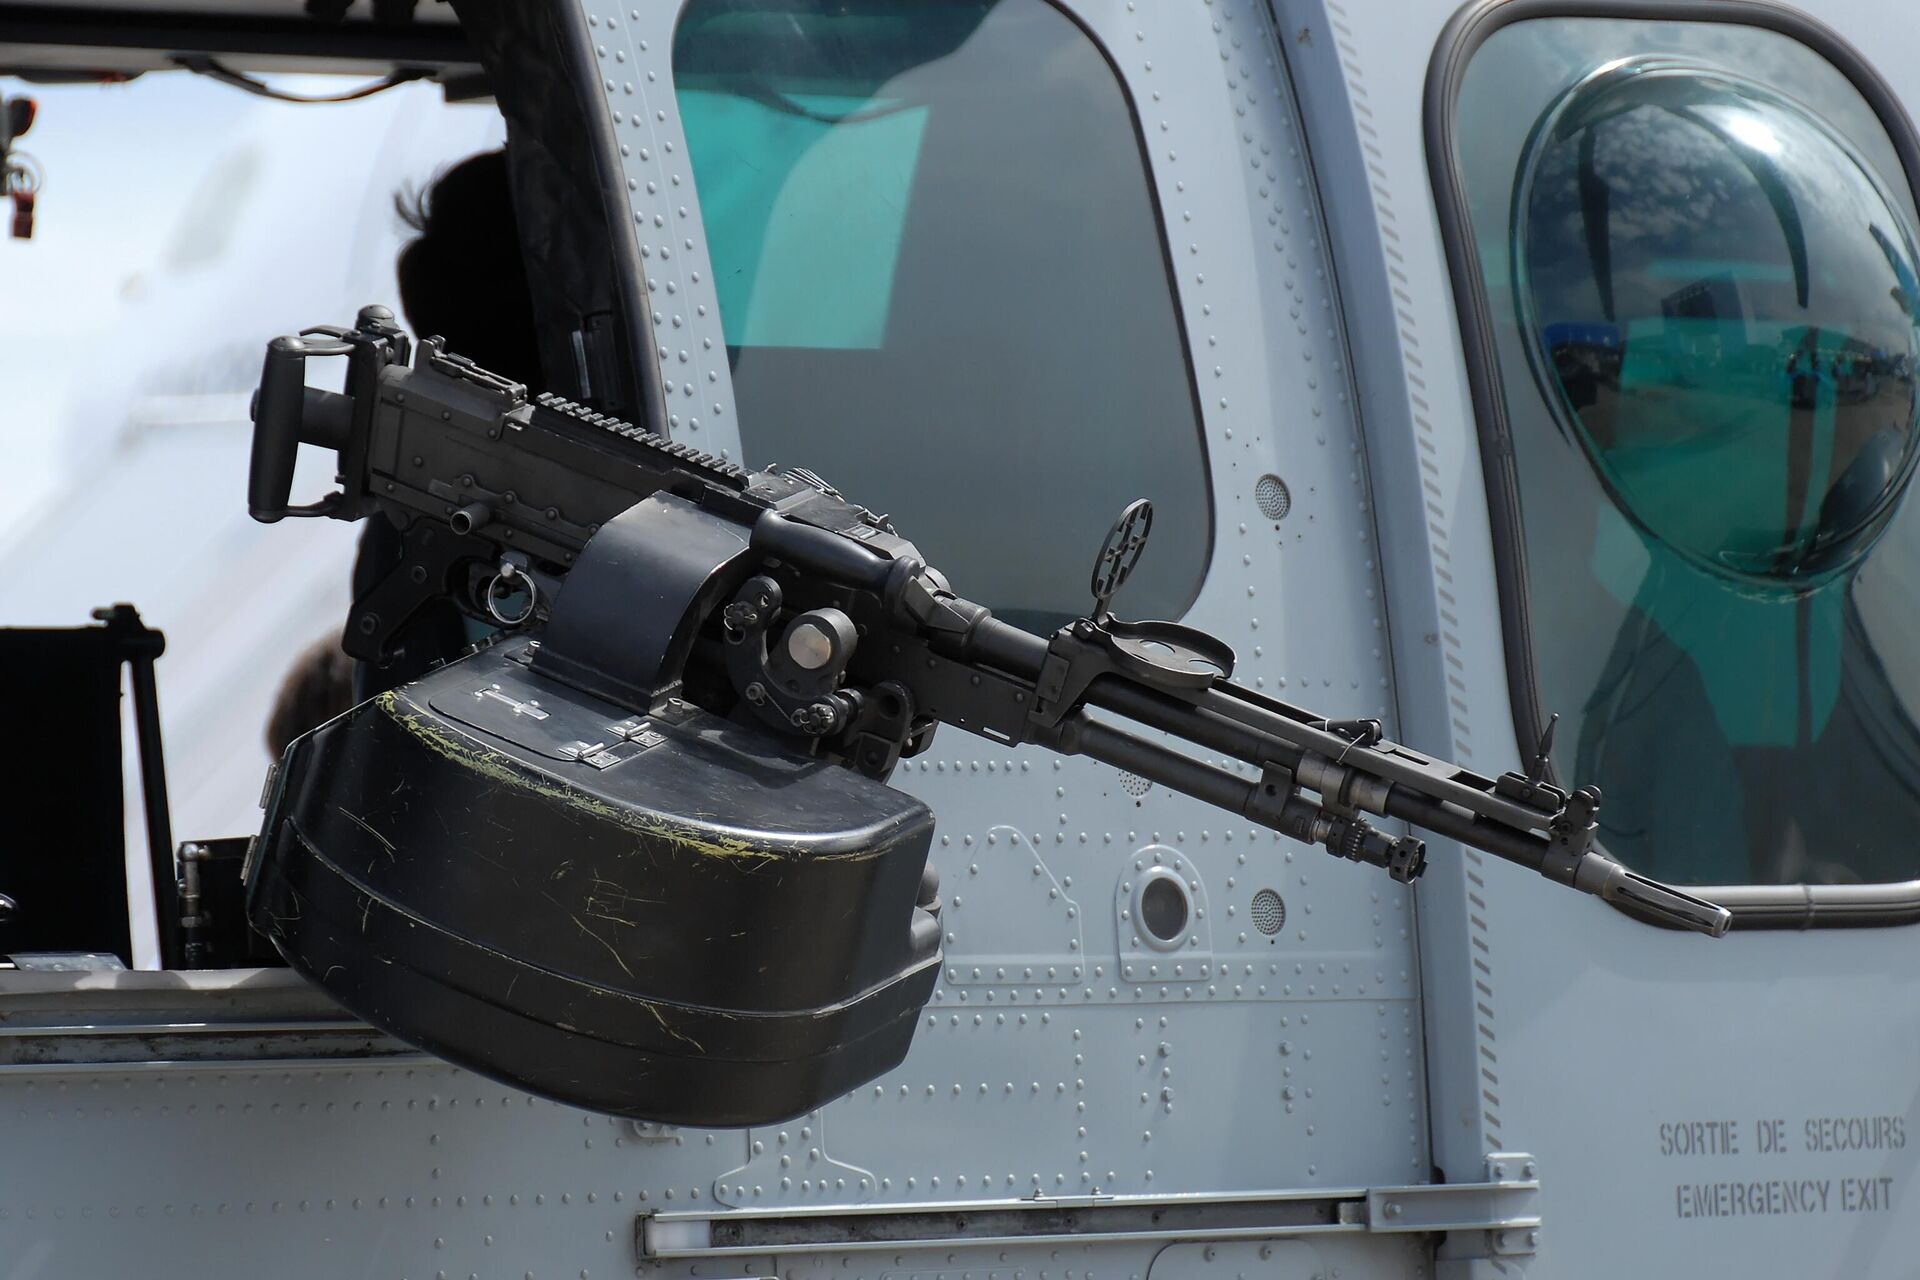  A FN MAG mounted on an Eurocopter Cougar MkII EC-725 at the 2007 International Paris Air Show at the Le Bourget airport. - Sputnik International, 1920, 18.09.2021